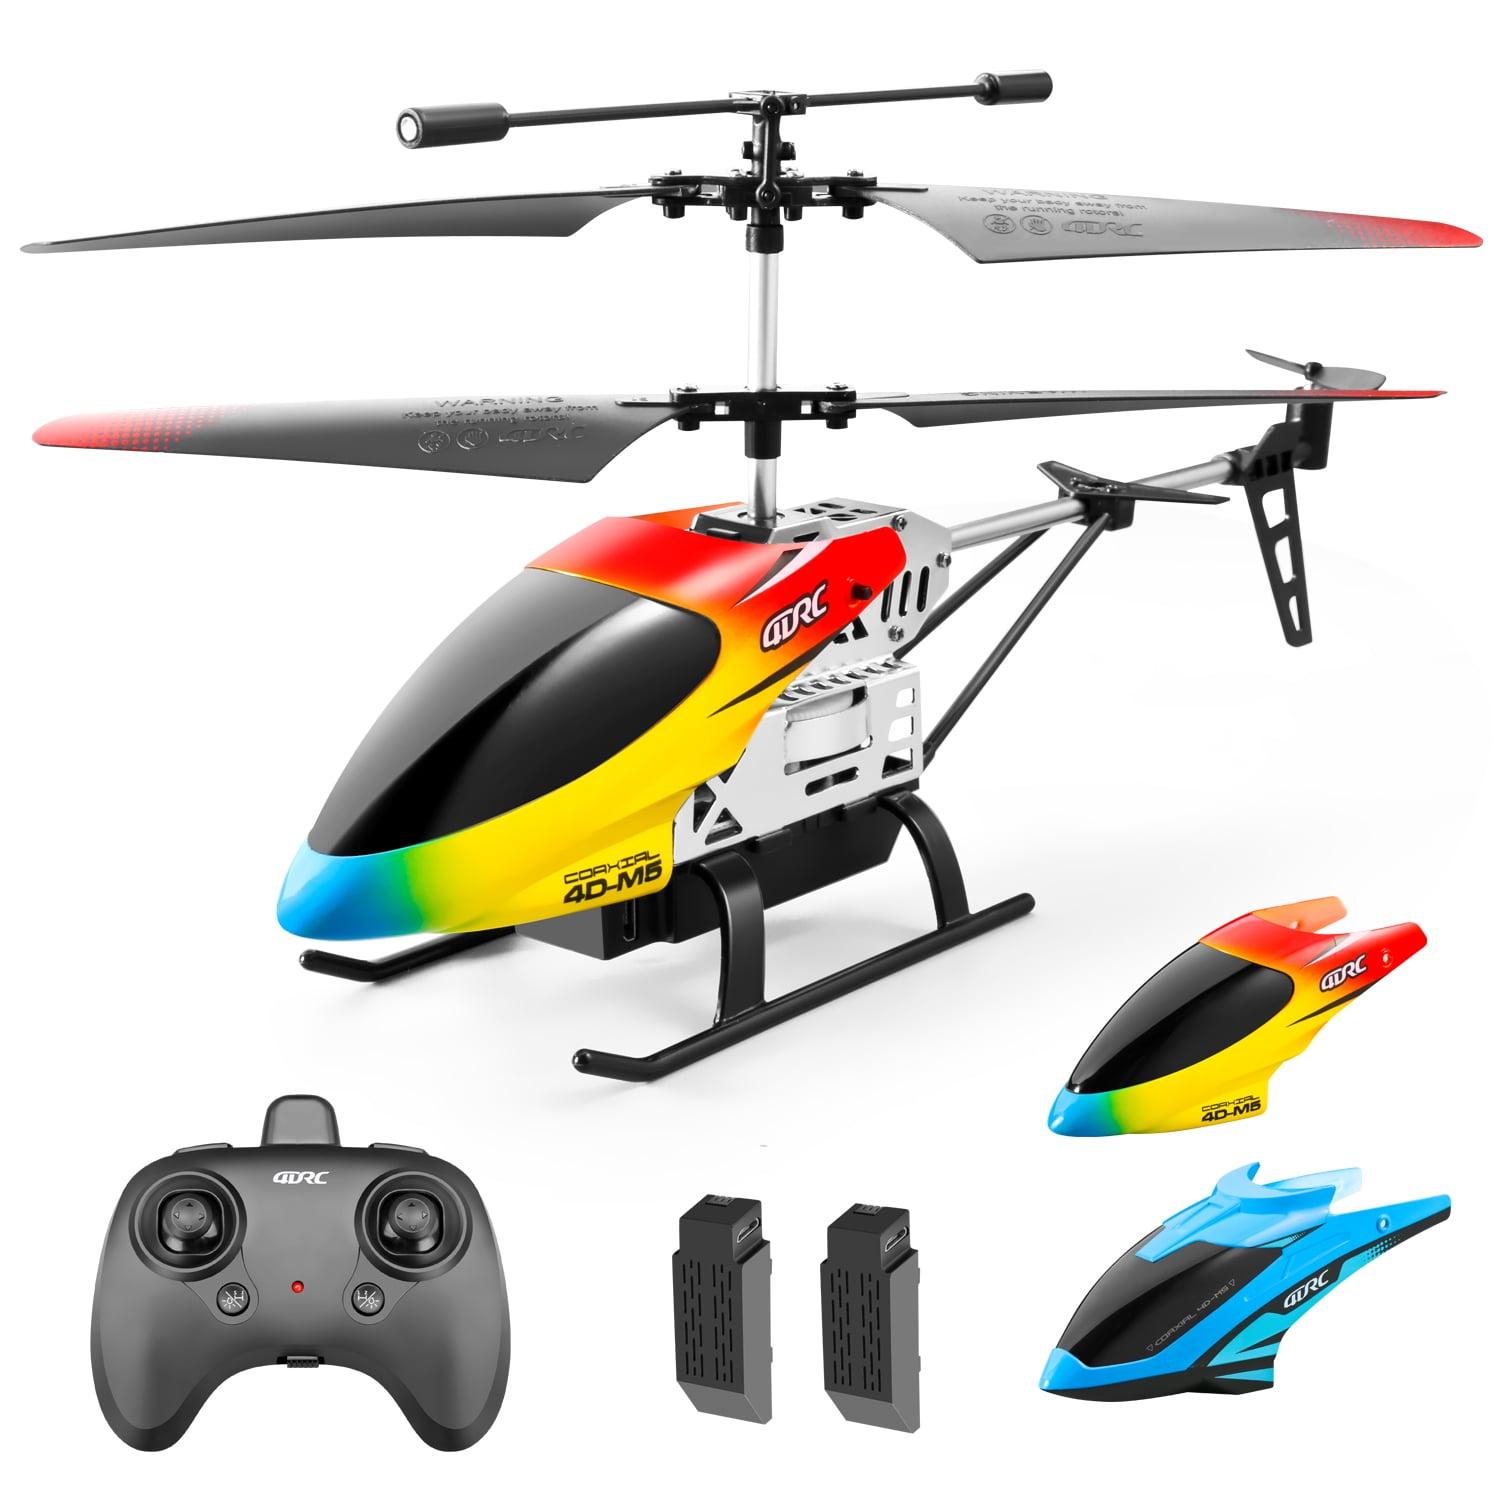 3.5 Ch Rc Helicopter: Pros and Cons of 3.5 ch RC Helicopters